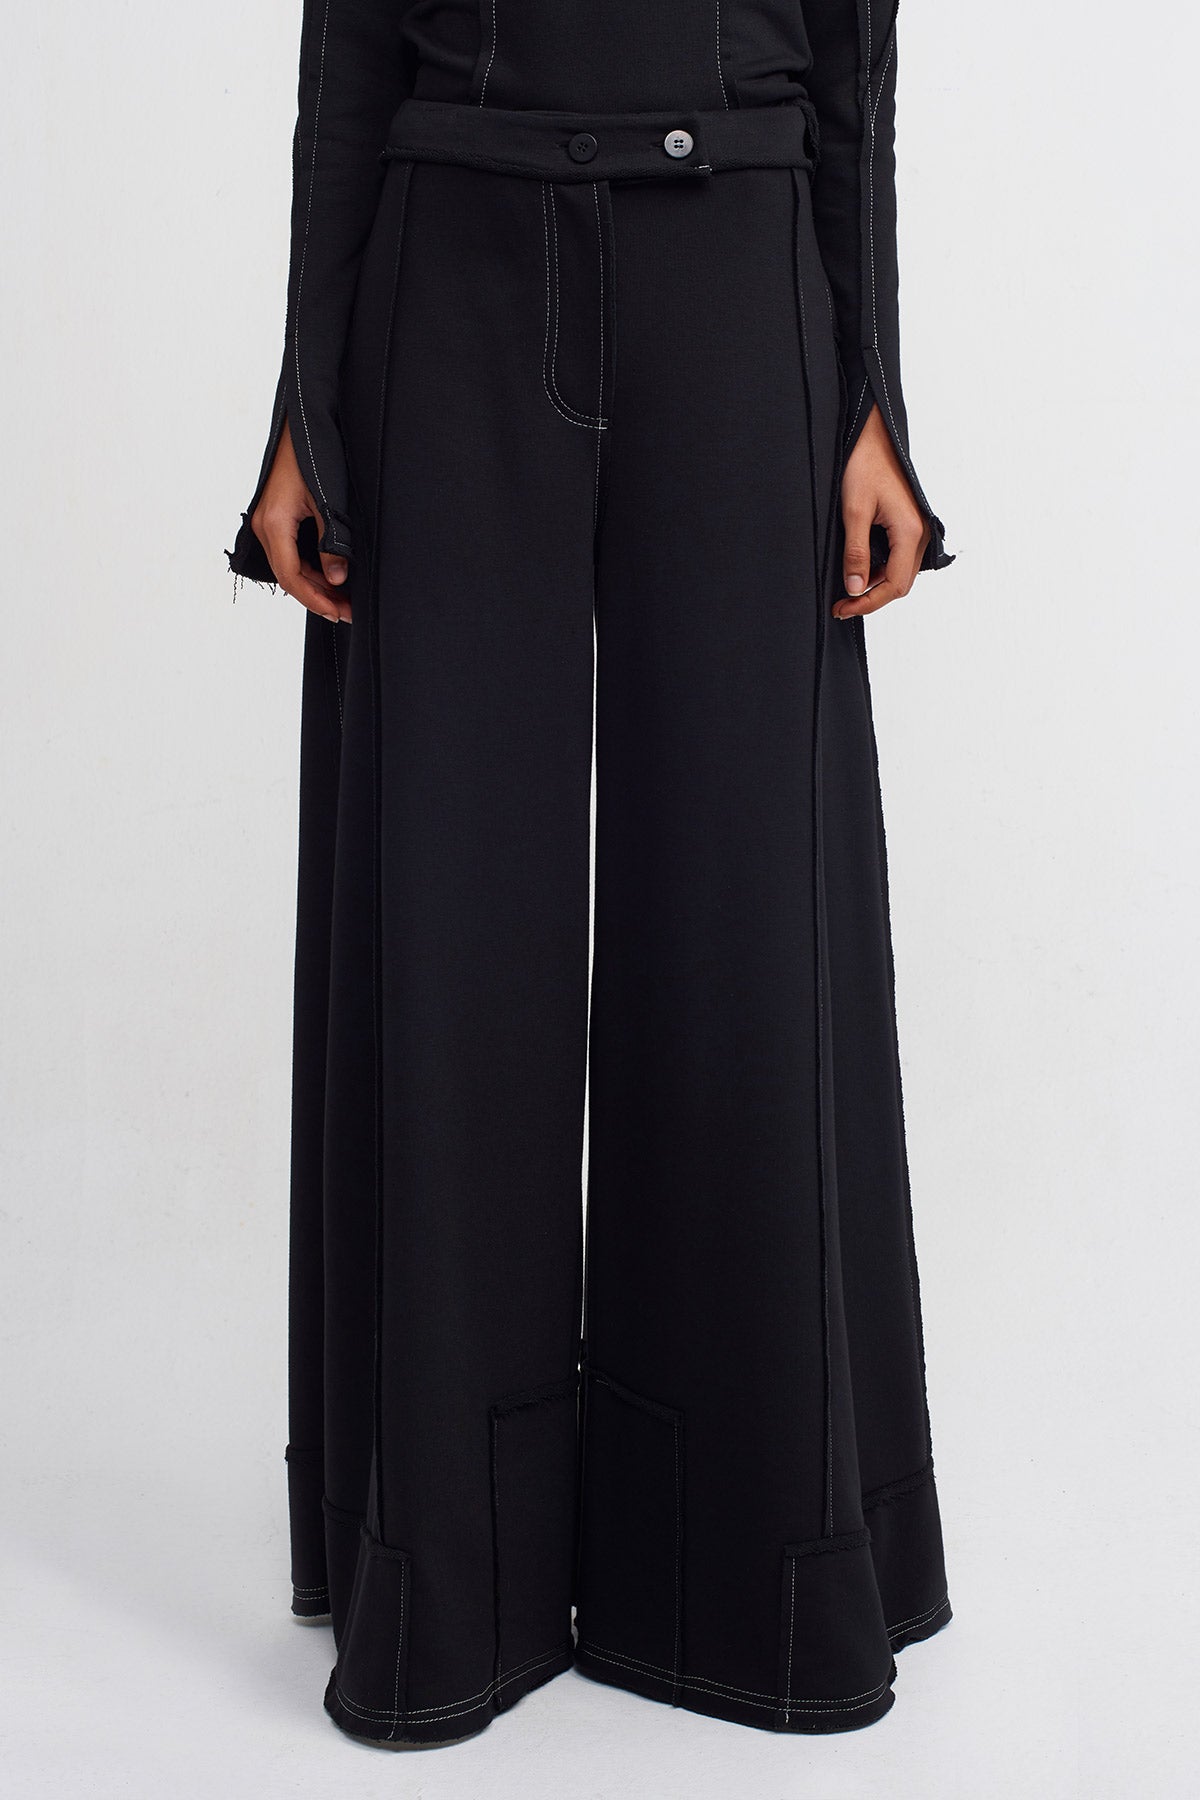 Black/Beige Wide Leg Trousers with Contrast Stitching Detail-Y243013043